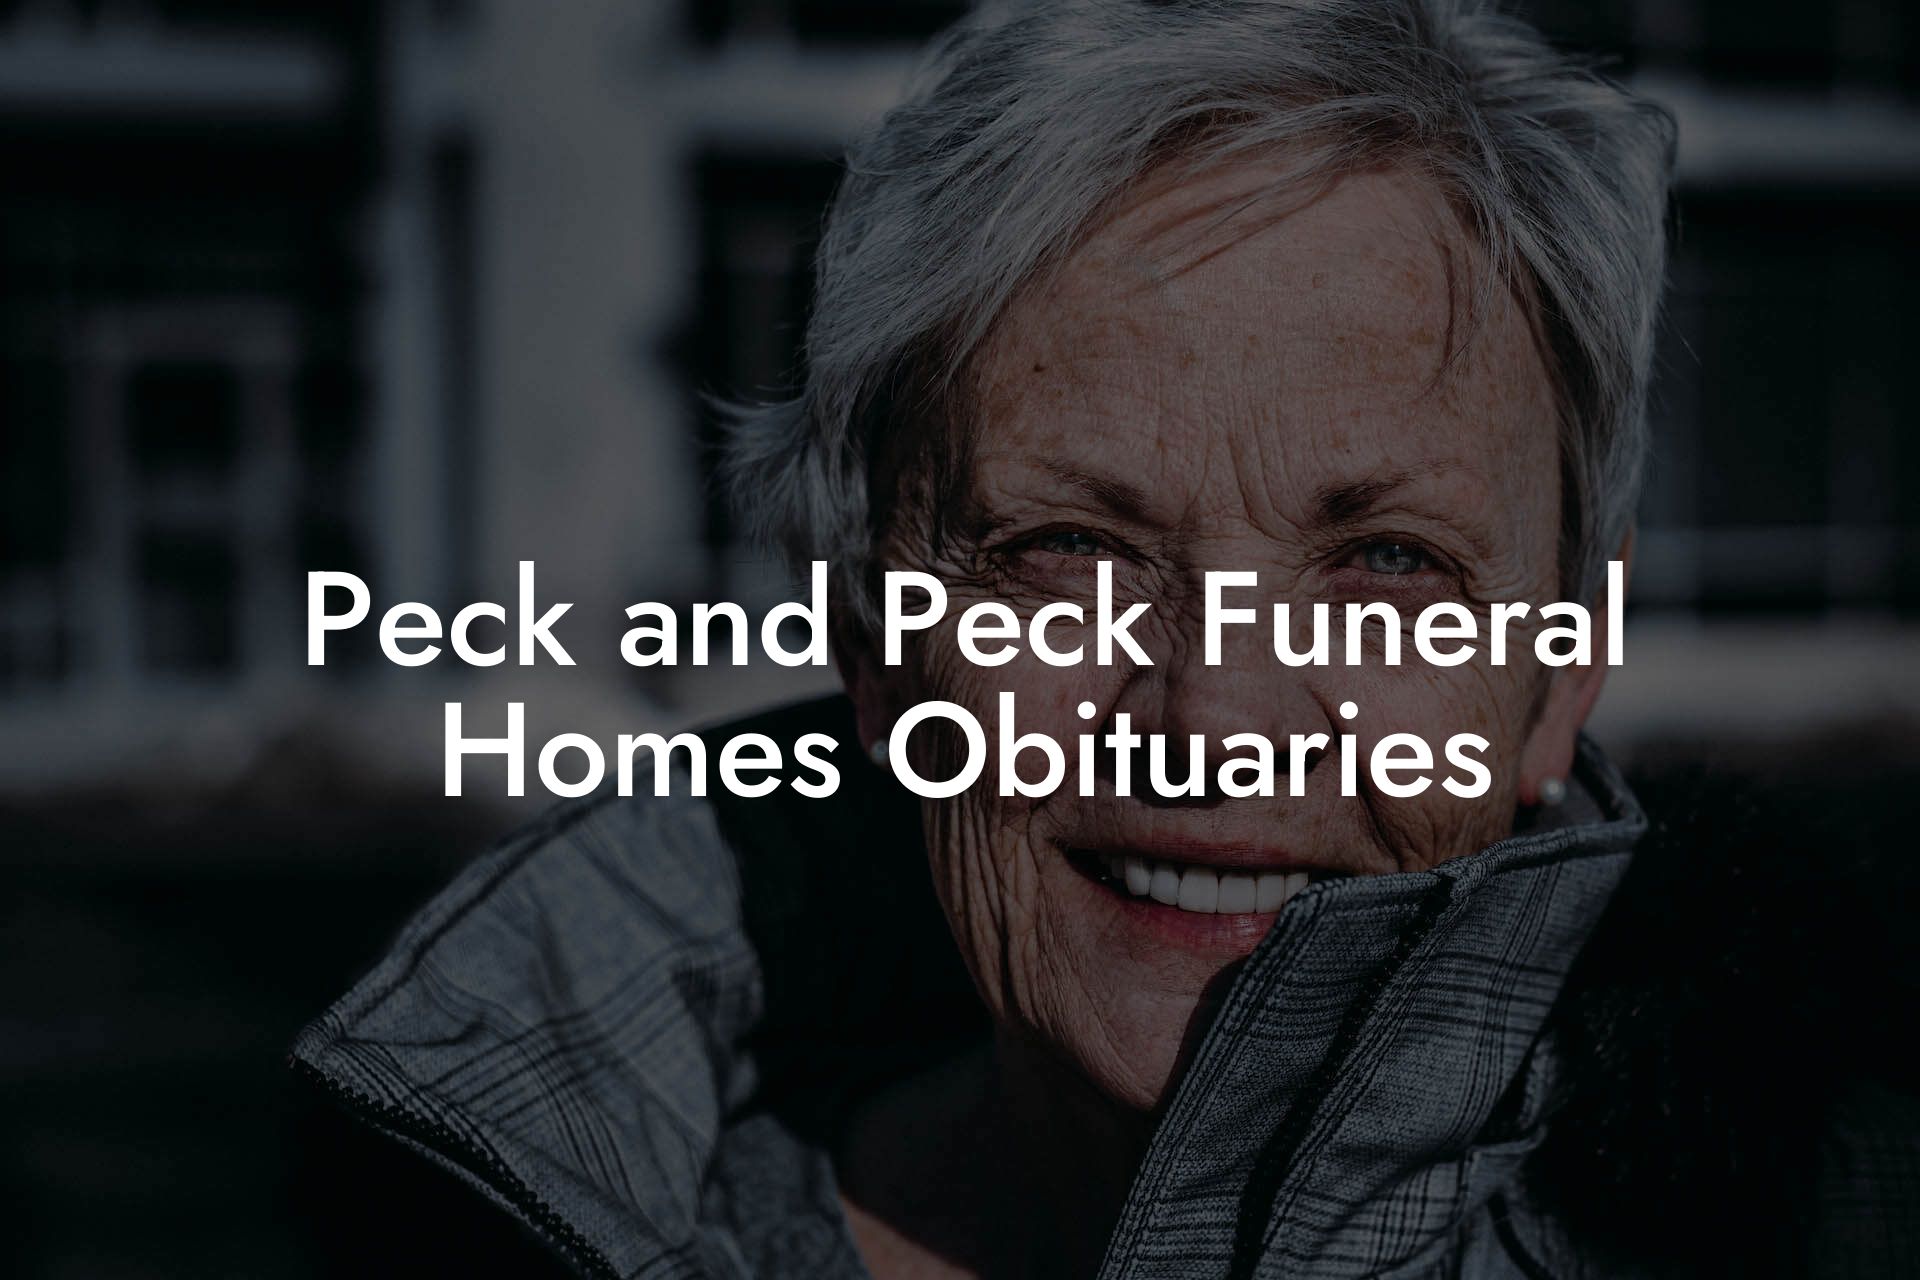 Peck and Peck Funeral Homes Obituaries